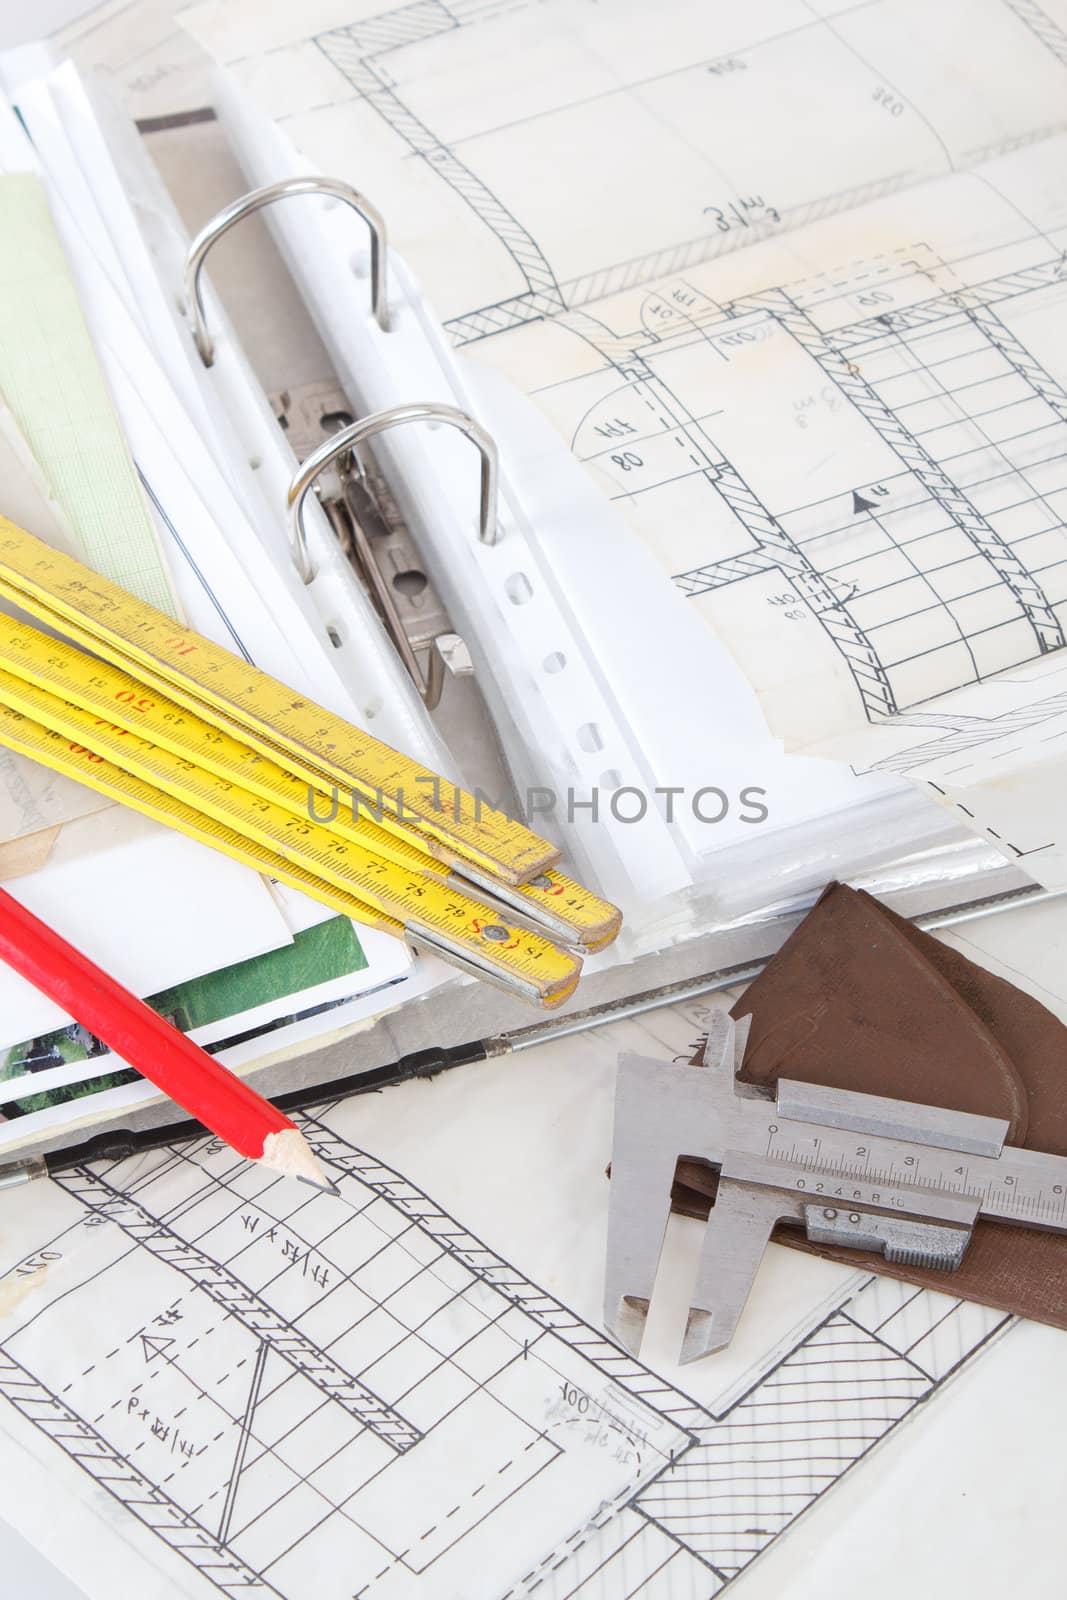 Architectural plans of the old paper tracing paper measuring tools and file with the project